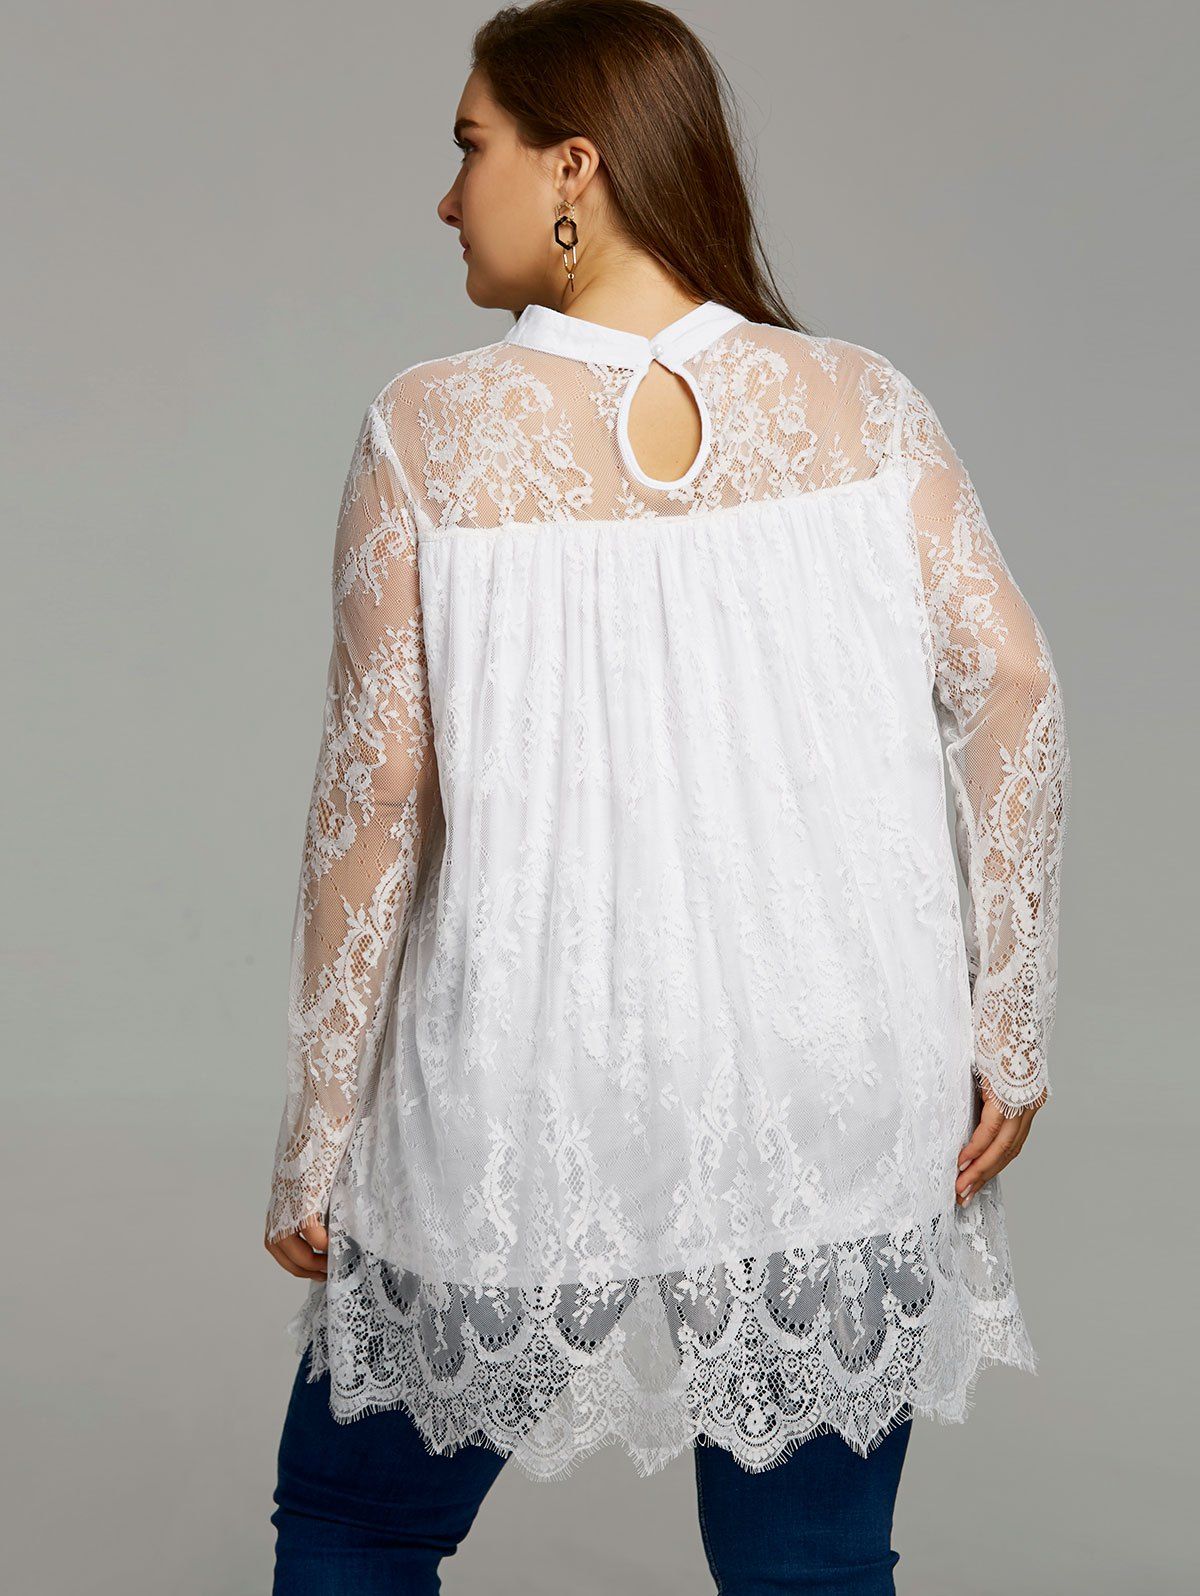 2018 Plus Size Lace Sheer Scalloped Edge Blouse WHITE XL In Plus Size ...